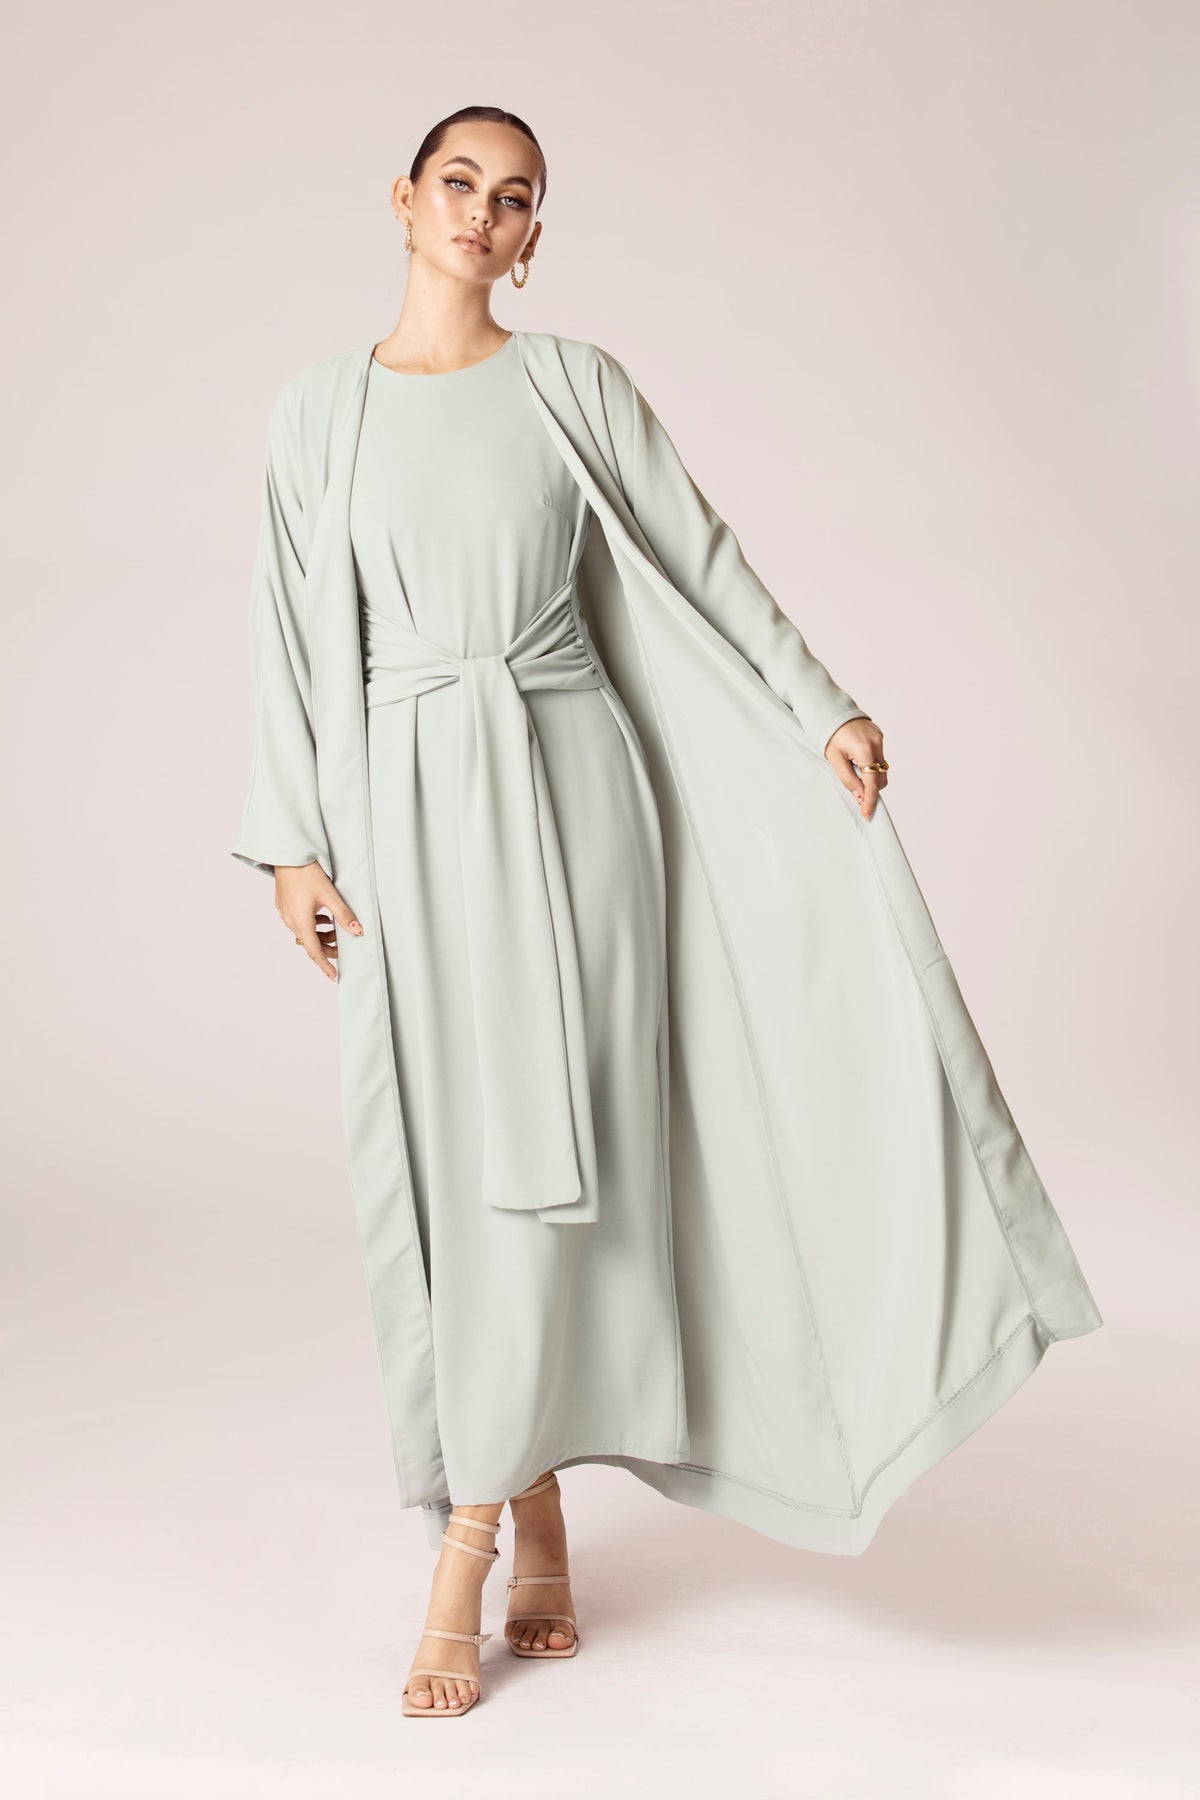 Isabella Open Abaya - Cucumber Veiled Collection 